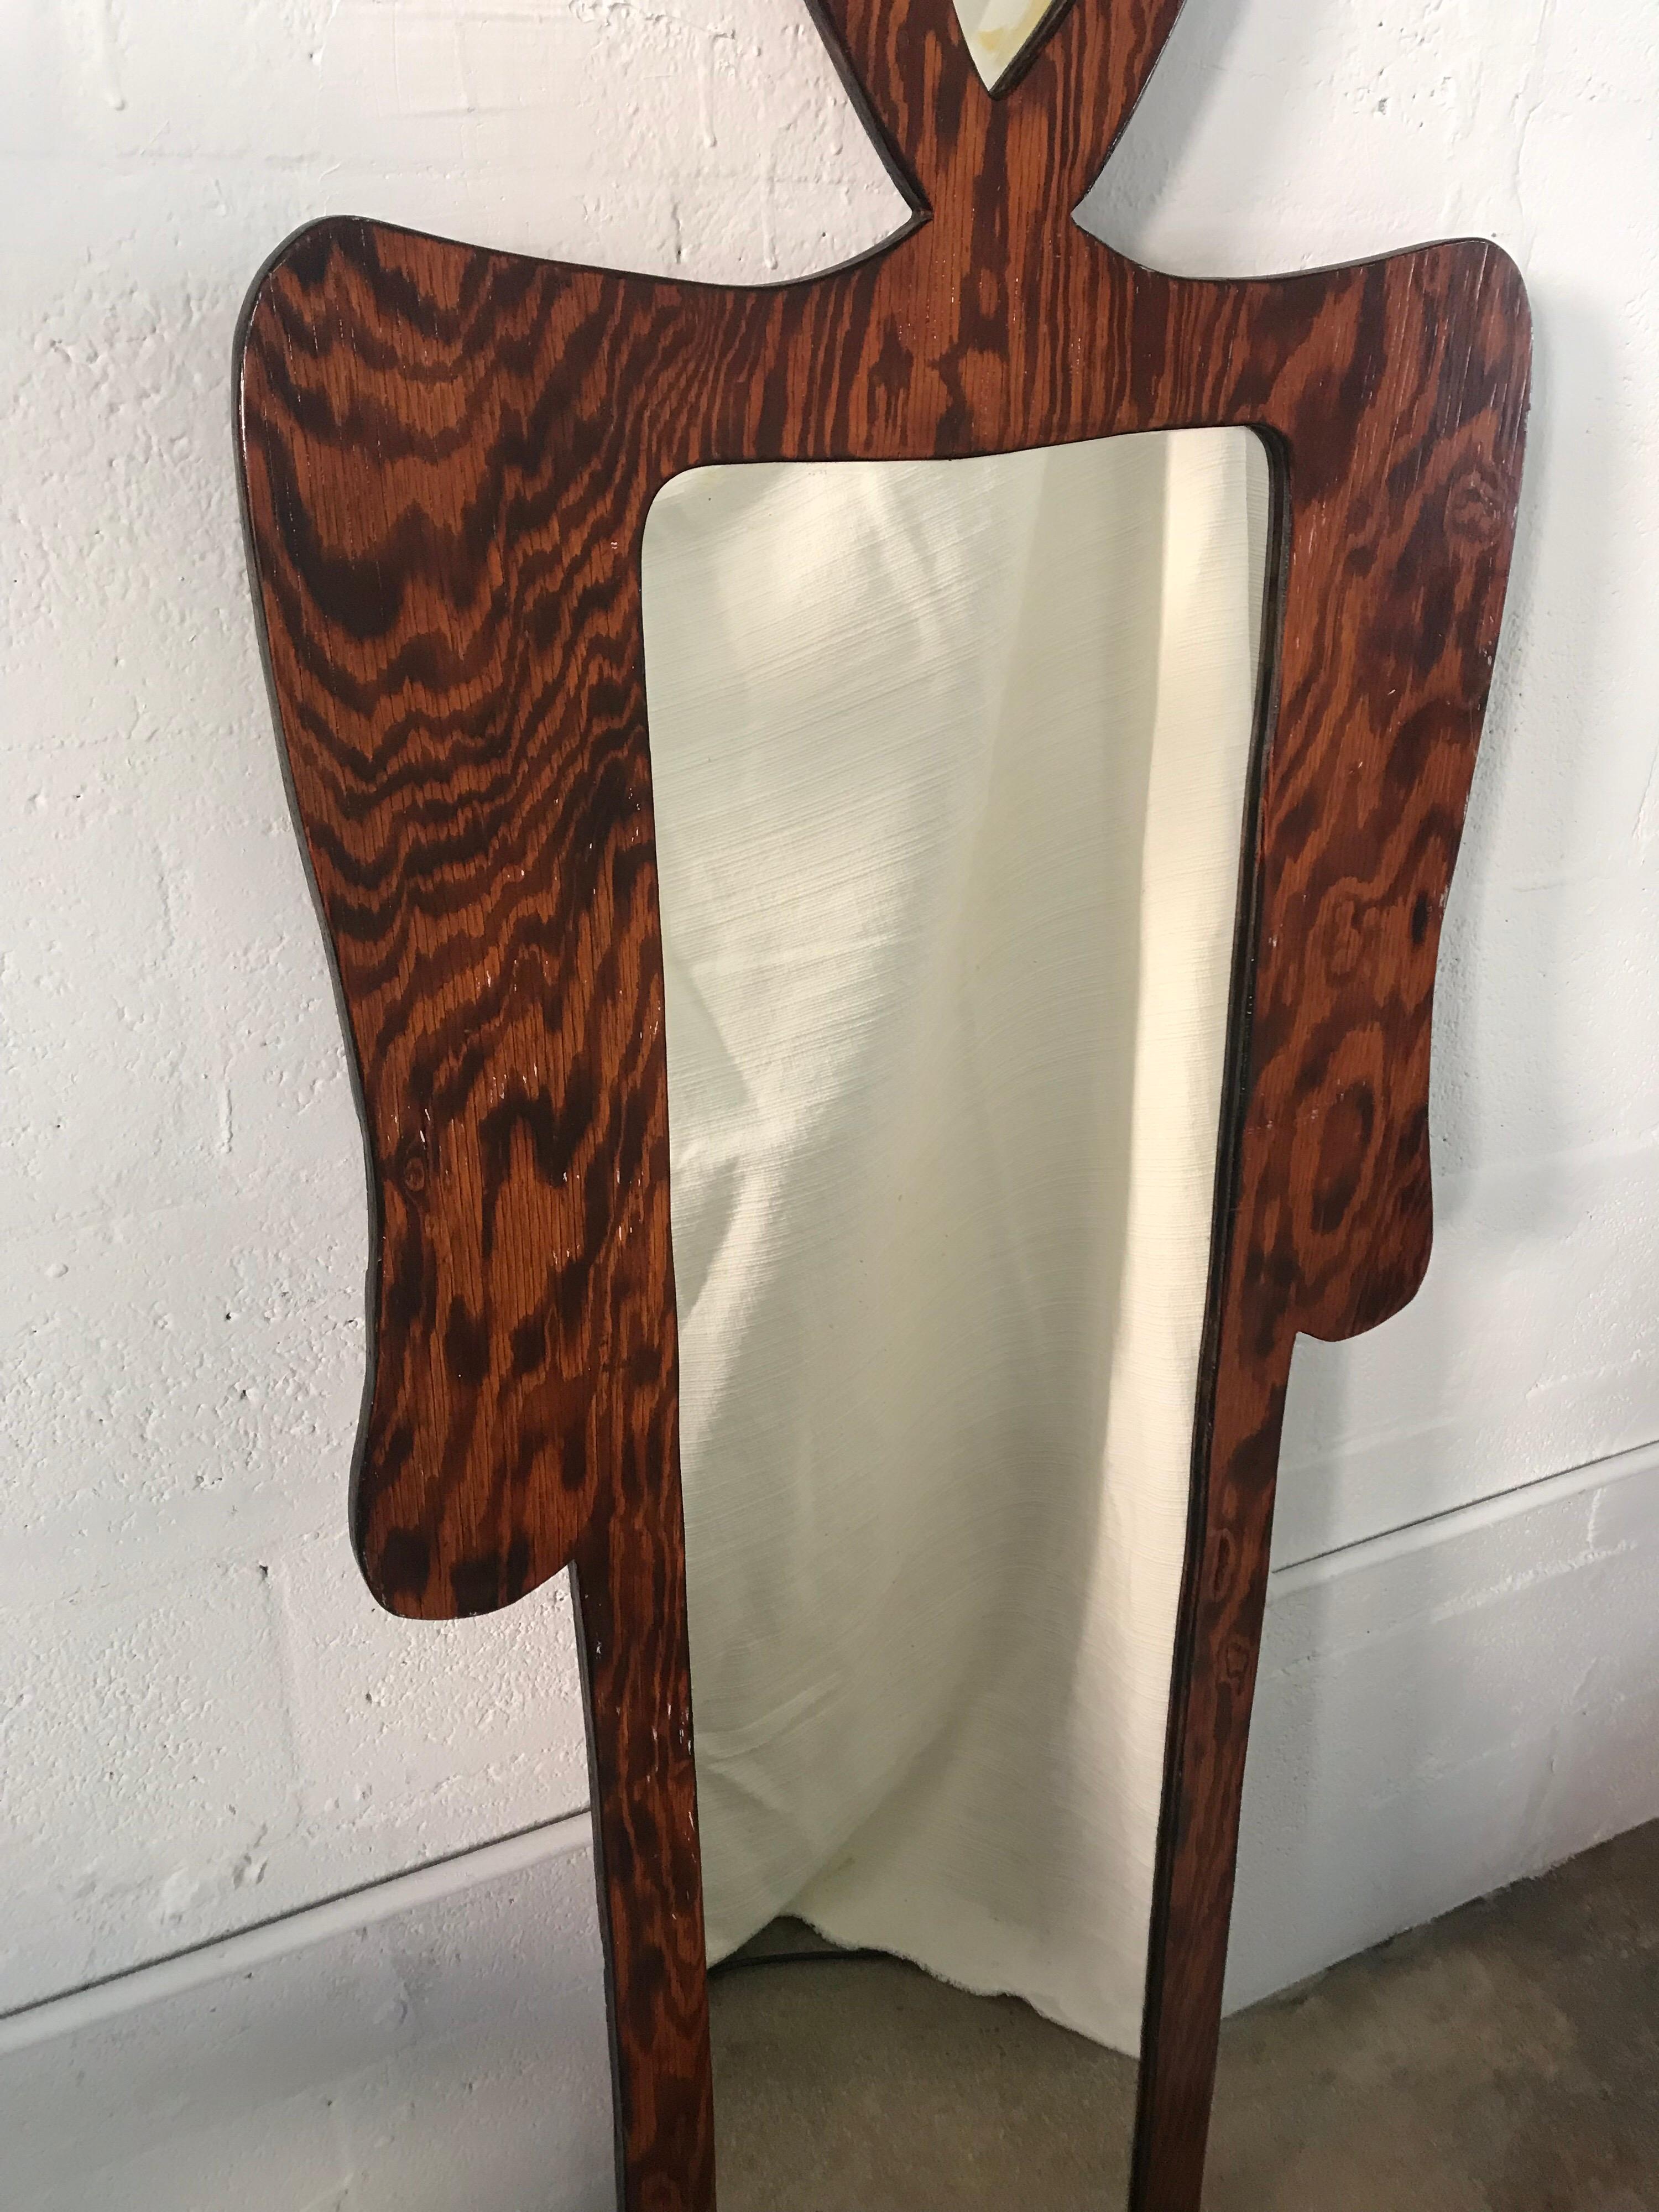 20th Century Post Modern Figural Full Length Floor or Wall Mirror, USA, Circa 1980s For Sale